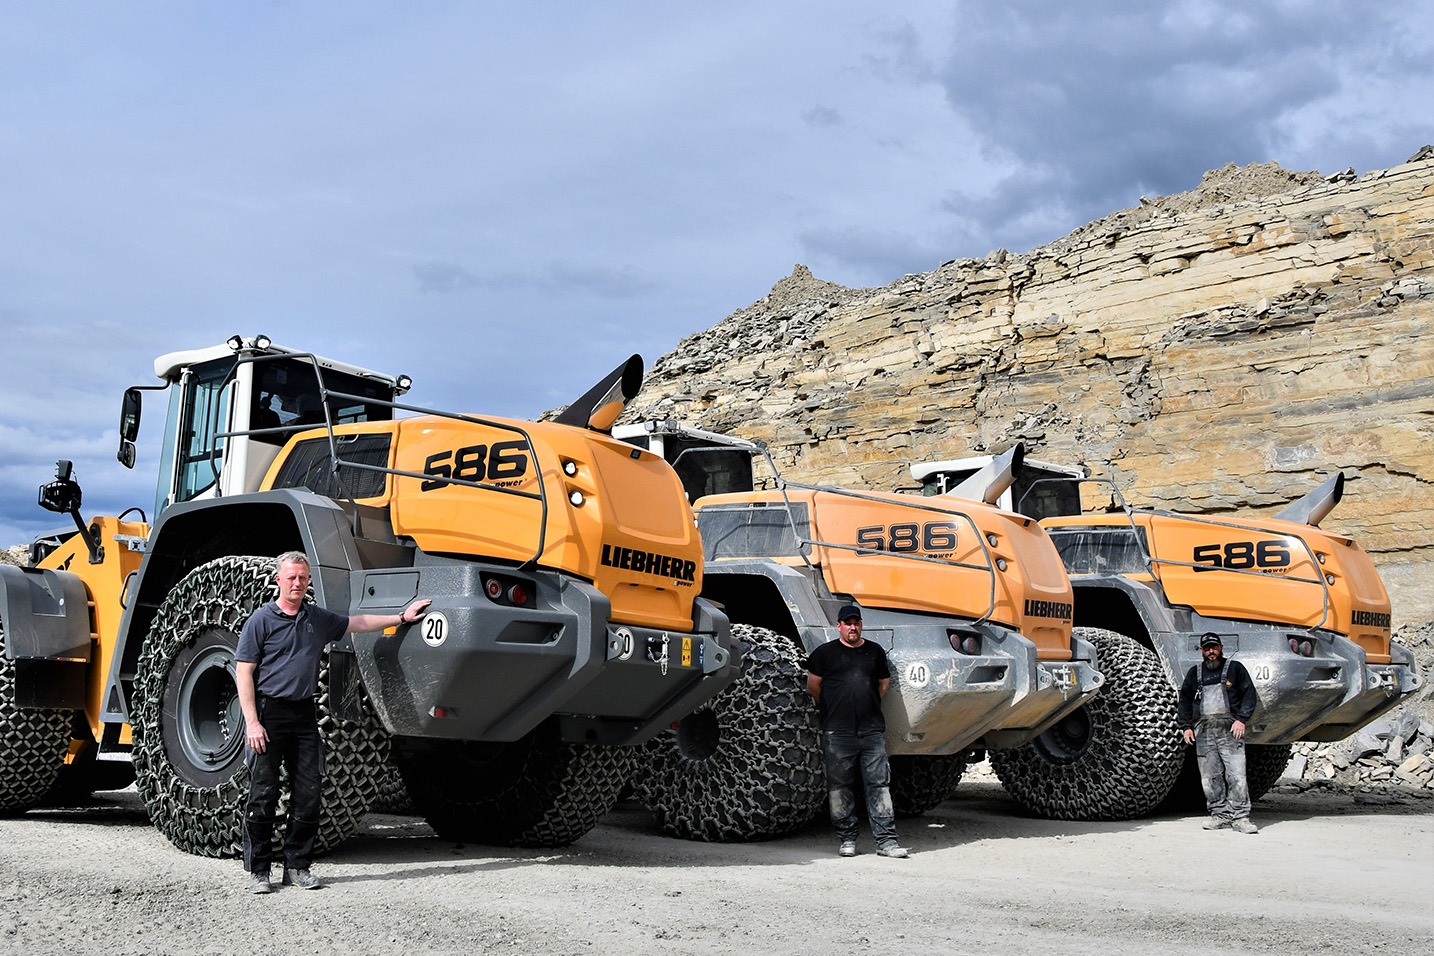 The handover ceremony for Rinsche's latest L 586 XPower wheeled loader